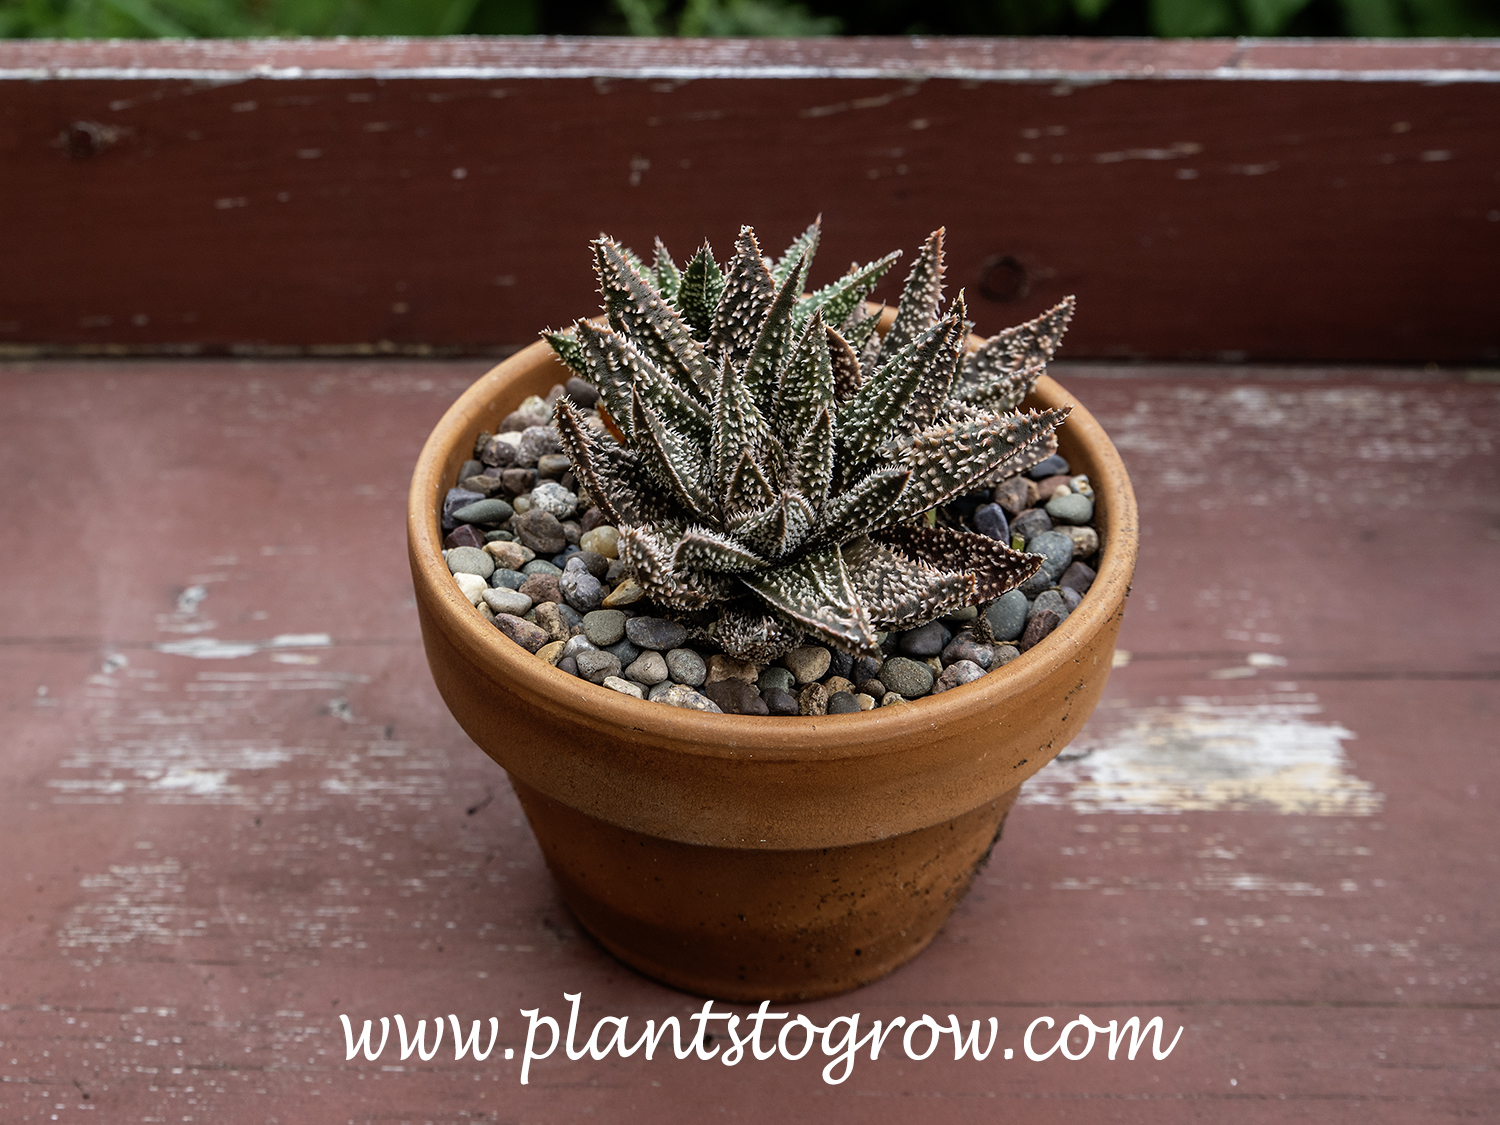 Gasteraloe 'Tarantula'
This plant is growing in a 5-6 inch pot.